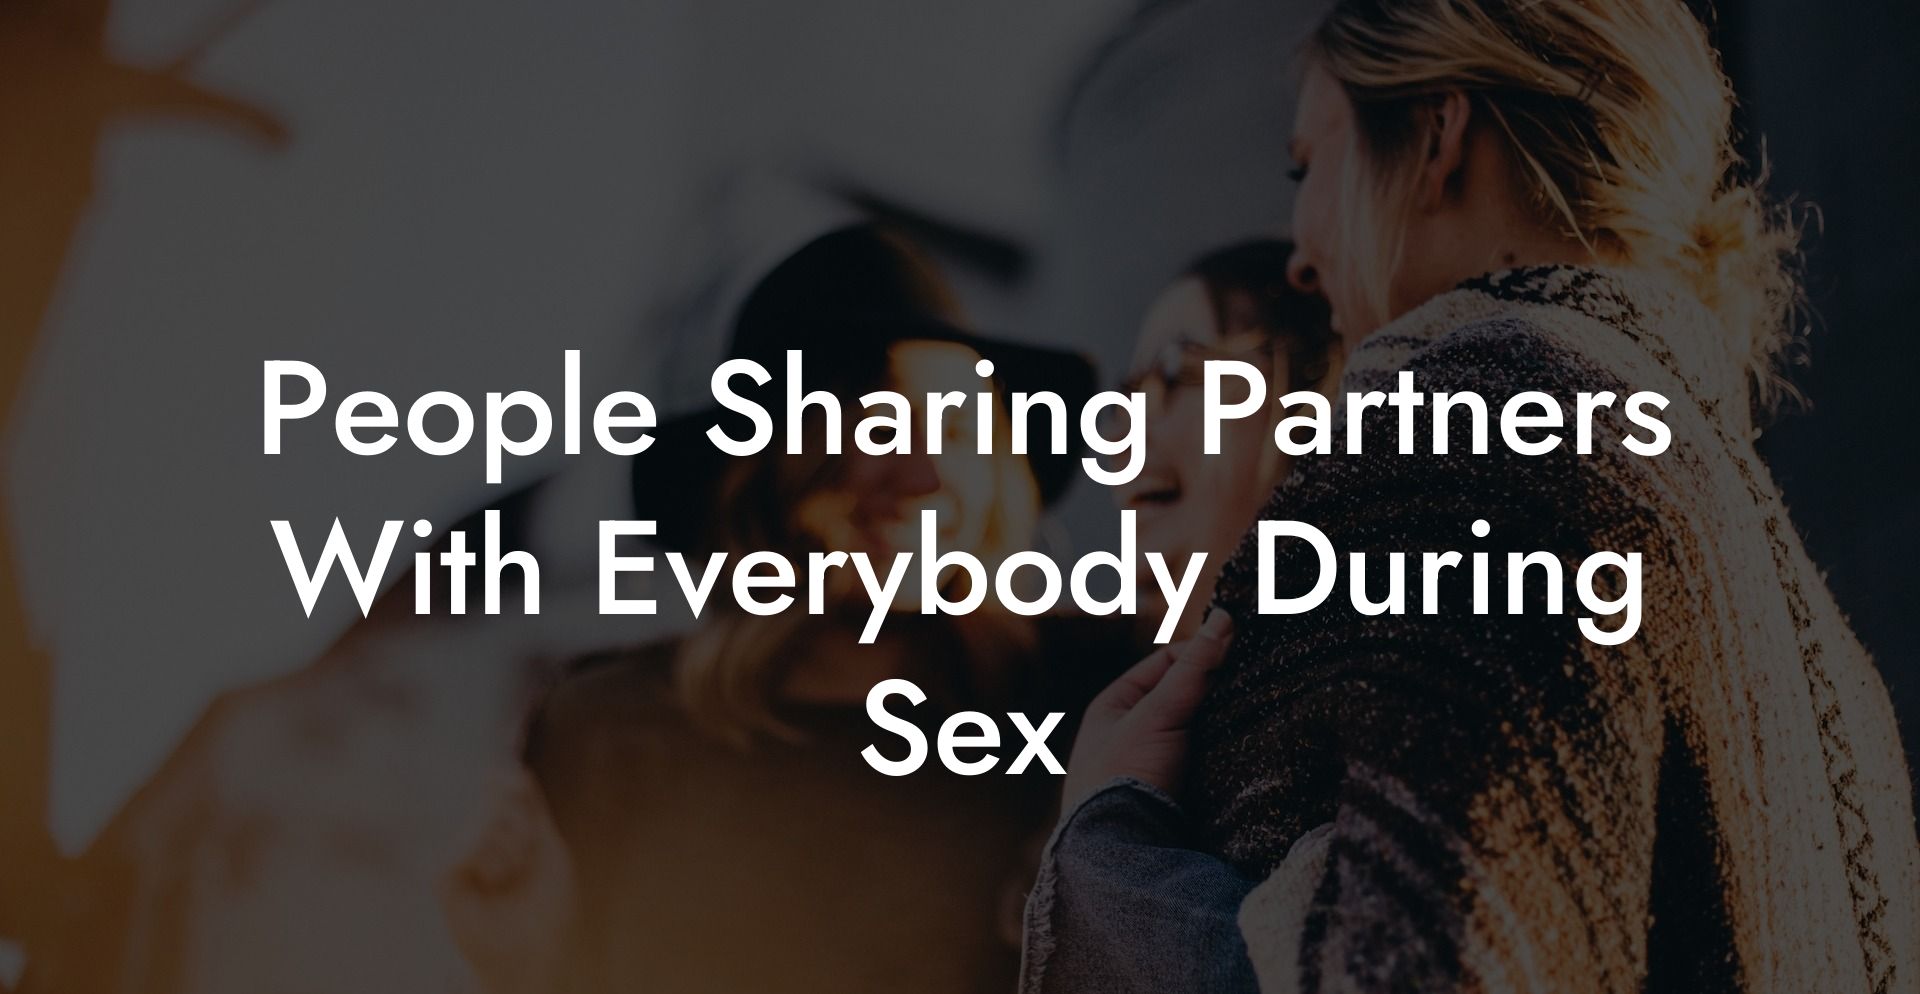 People Sharing Partners With Everybody During Sex